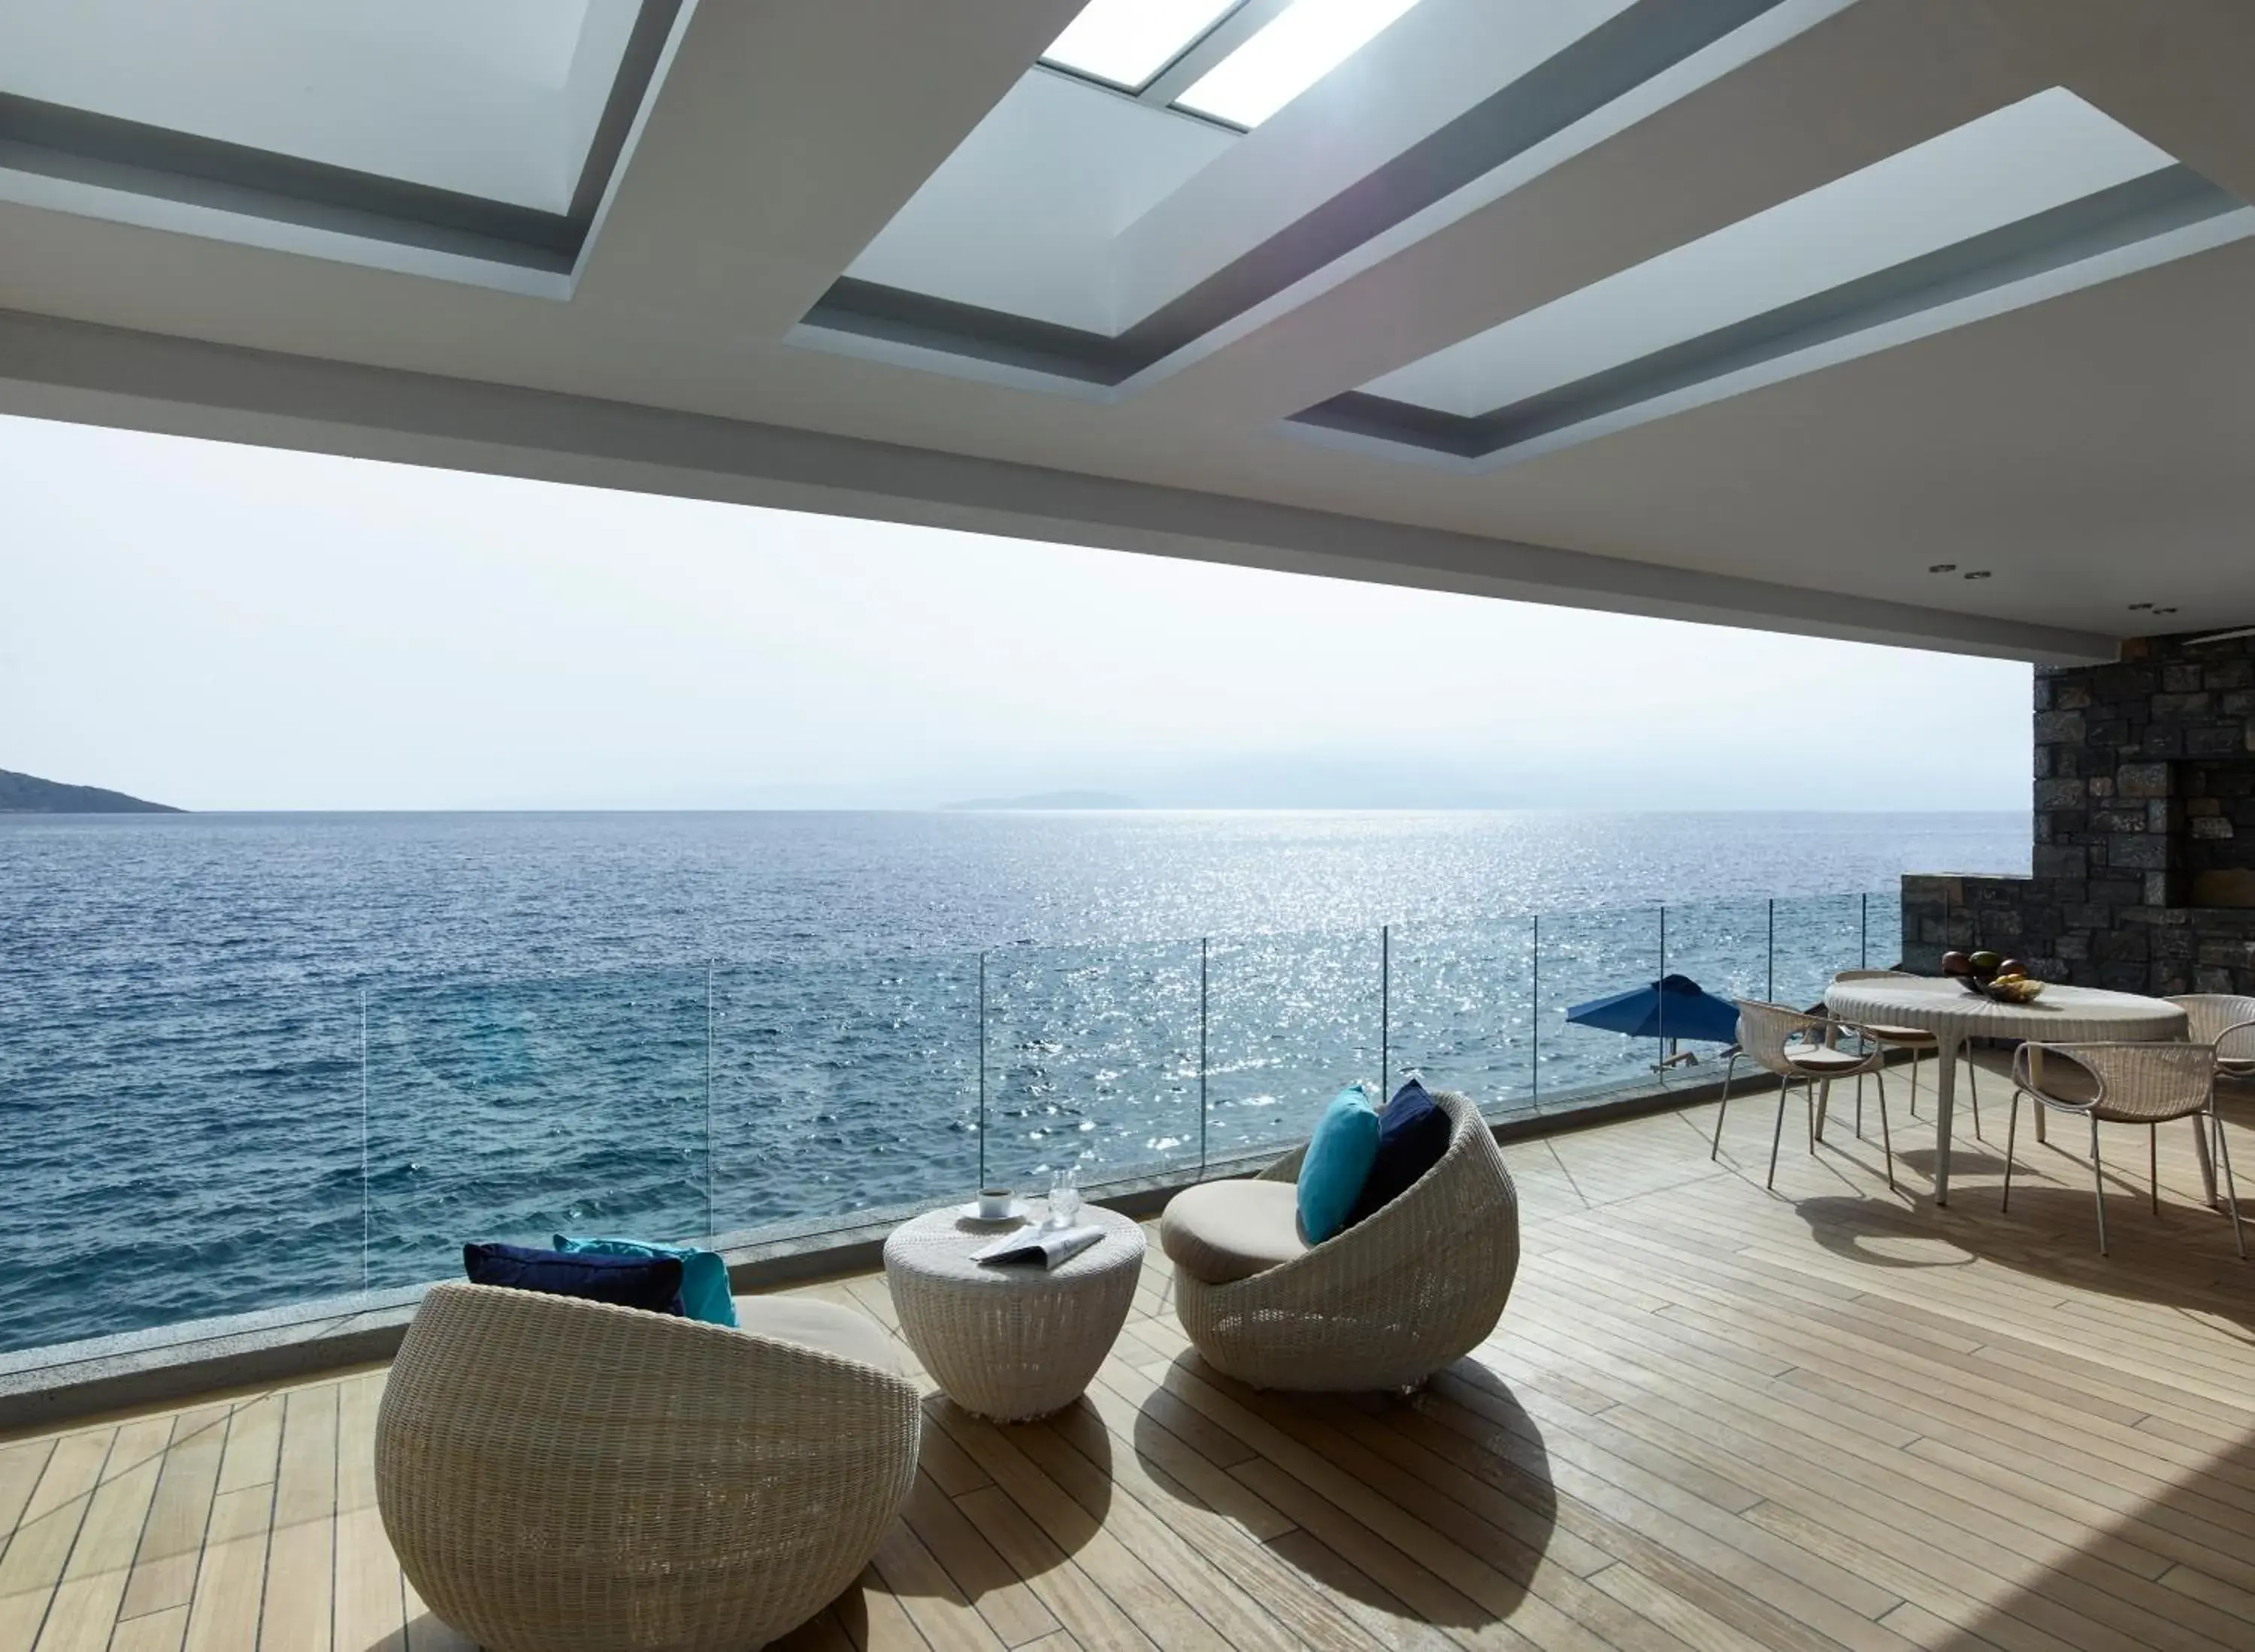 Sea View in Elounda Beach Hotel & Villas, a Member of the Leading Hotels of the World